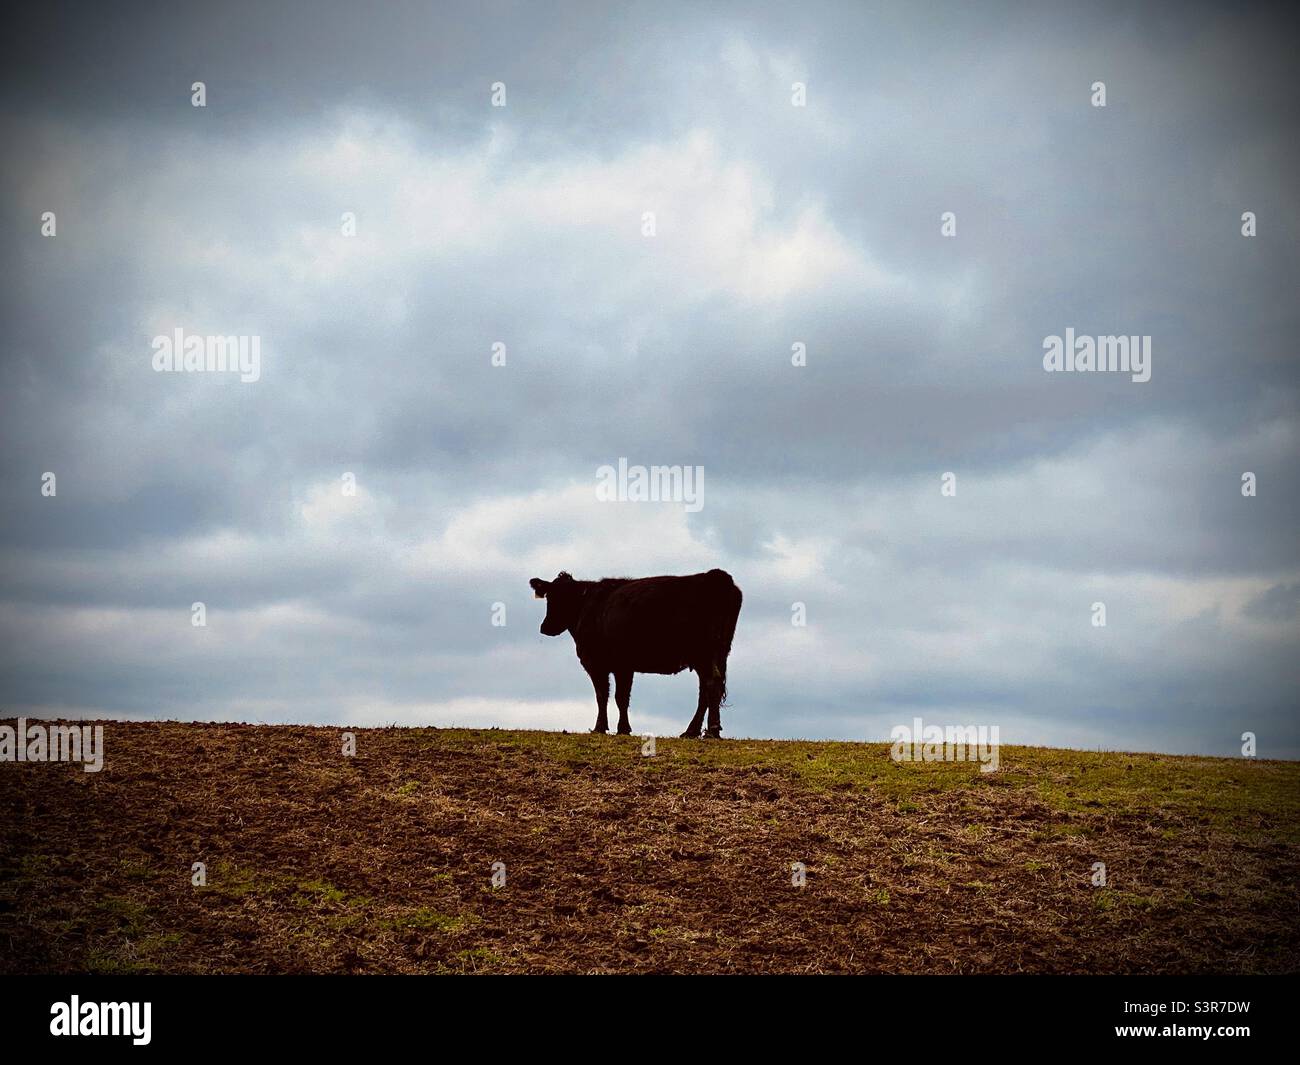 A lone black cow on top of a hill with a blue cloudy sky.  Photo taken in Missouri. Stock Photo